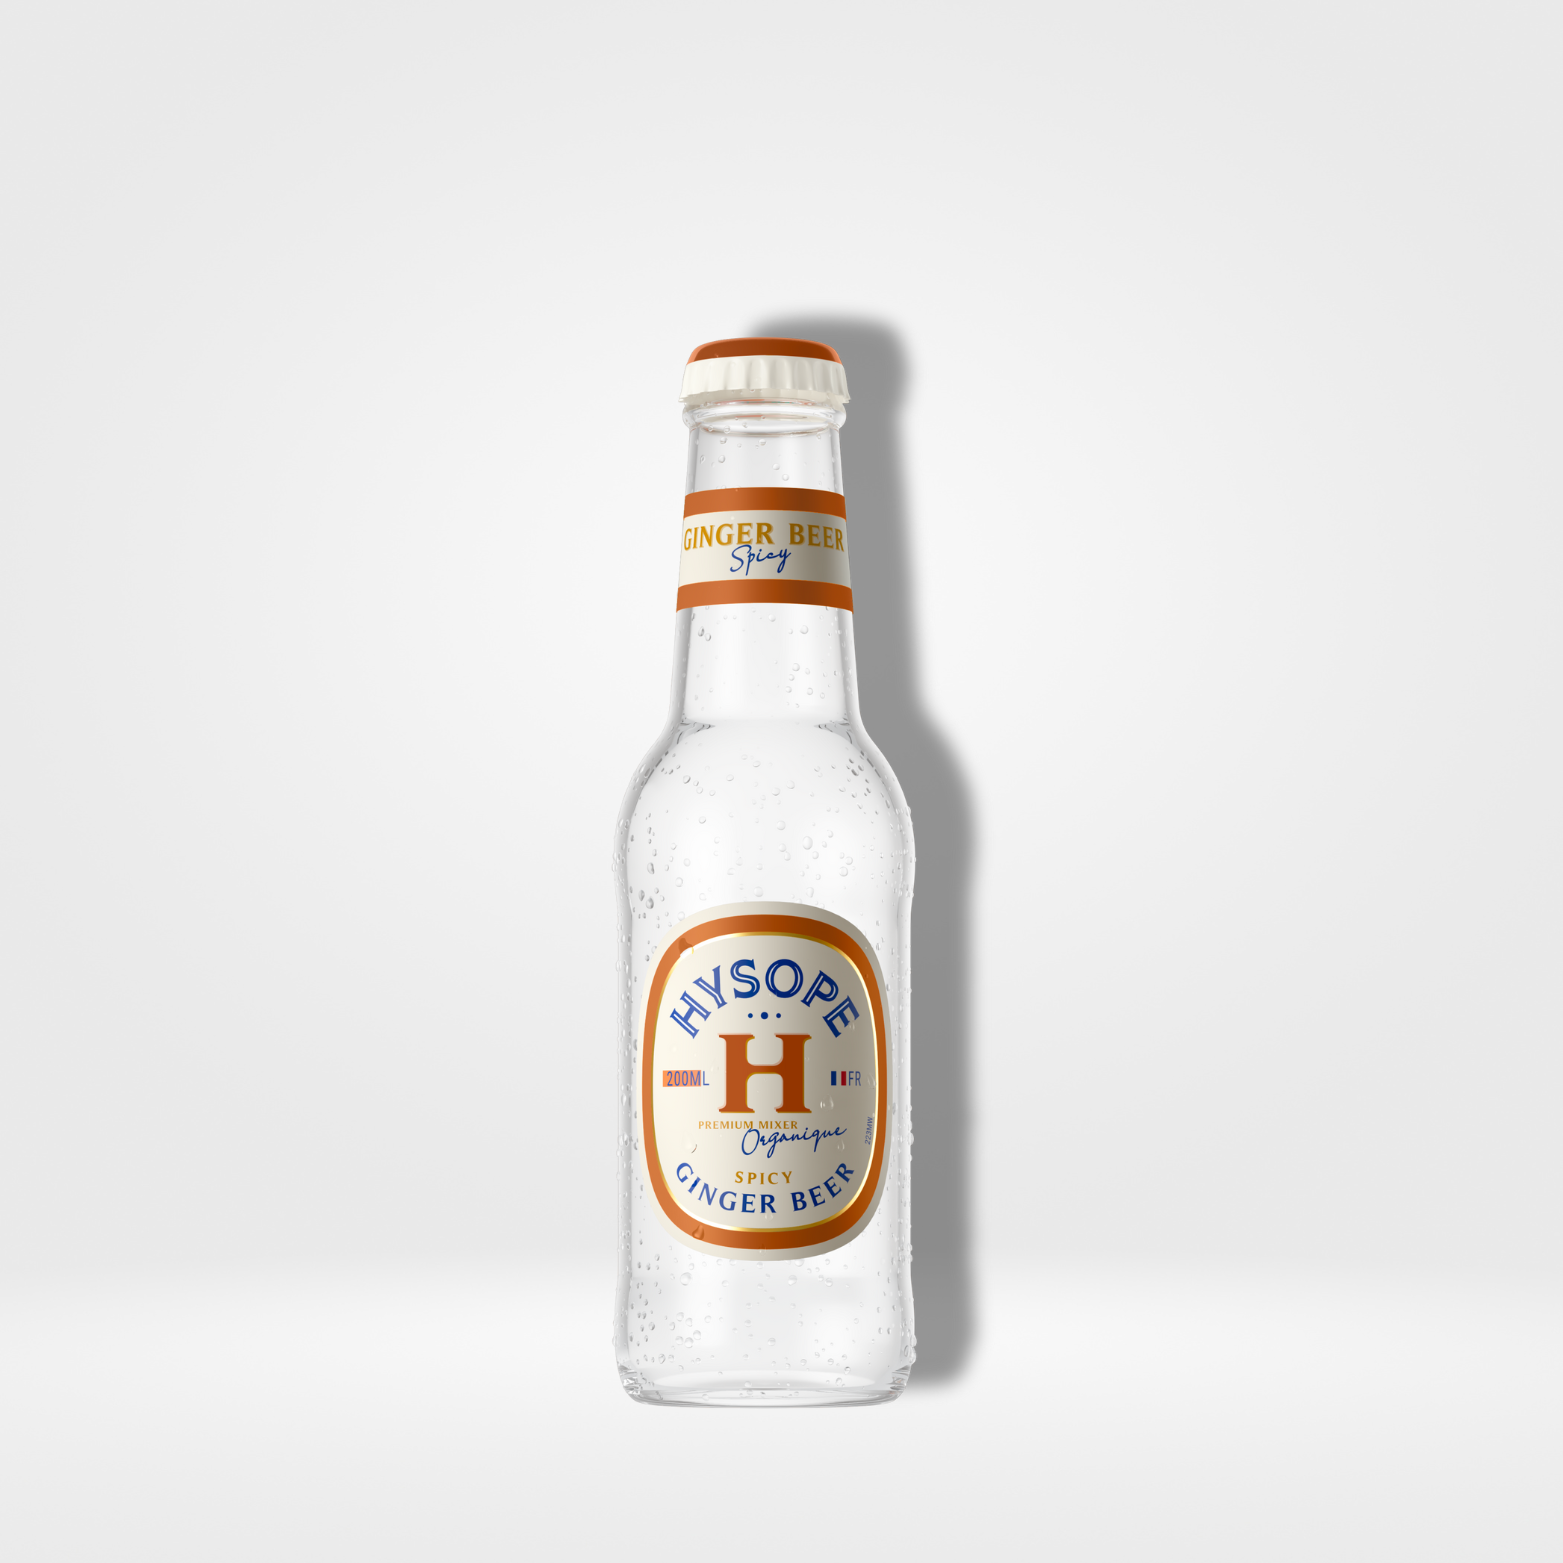 Hysope Ginger Beer Spicy 24 x 20cl